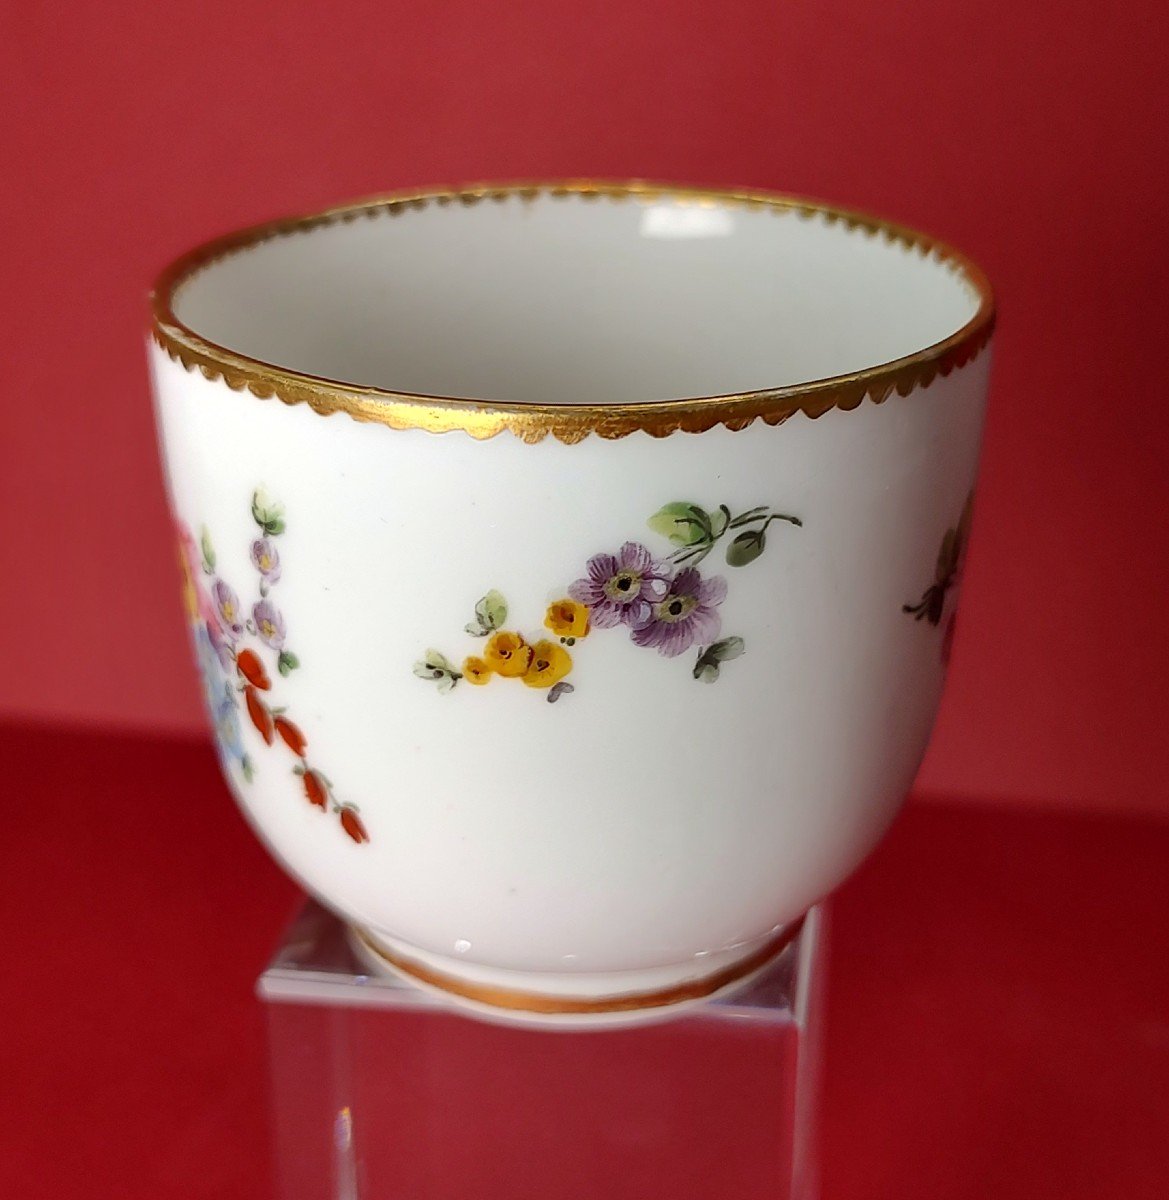 Manufacture De Sèvres - Cup And Saucer Decorated With Bouquets Of Flowers - 18th Century.-photo-4